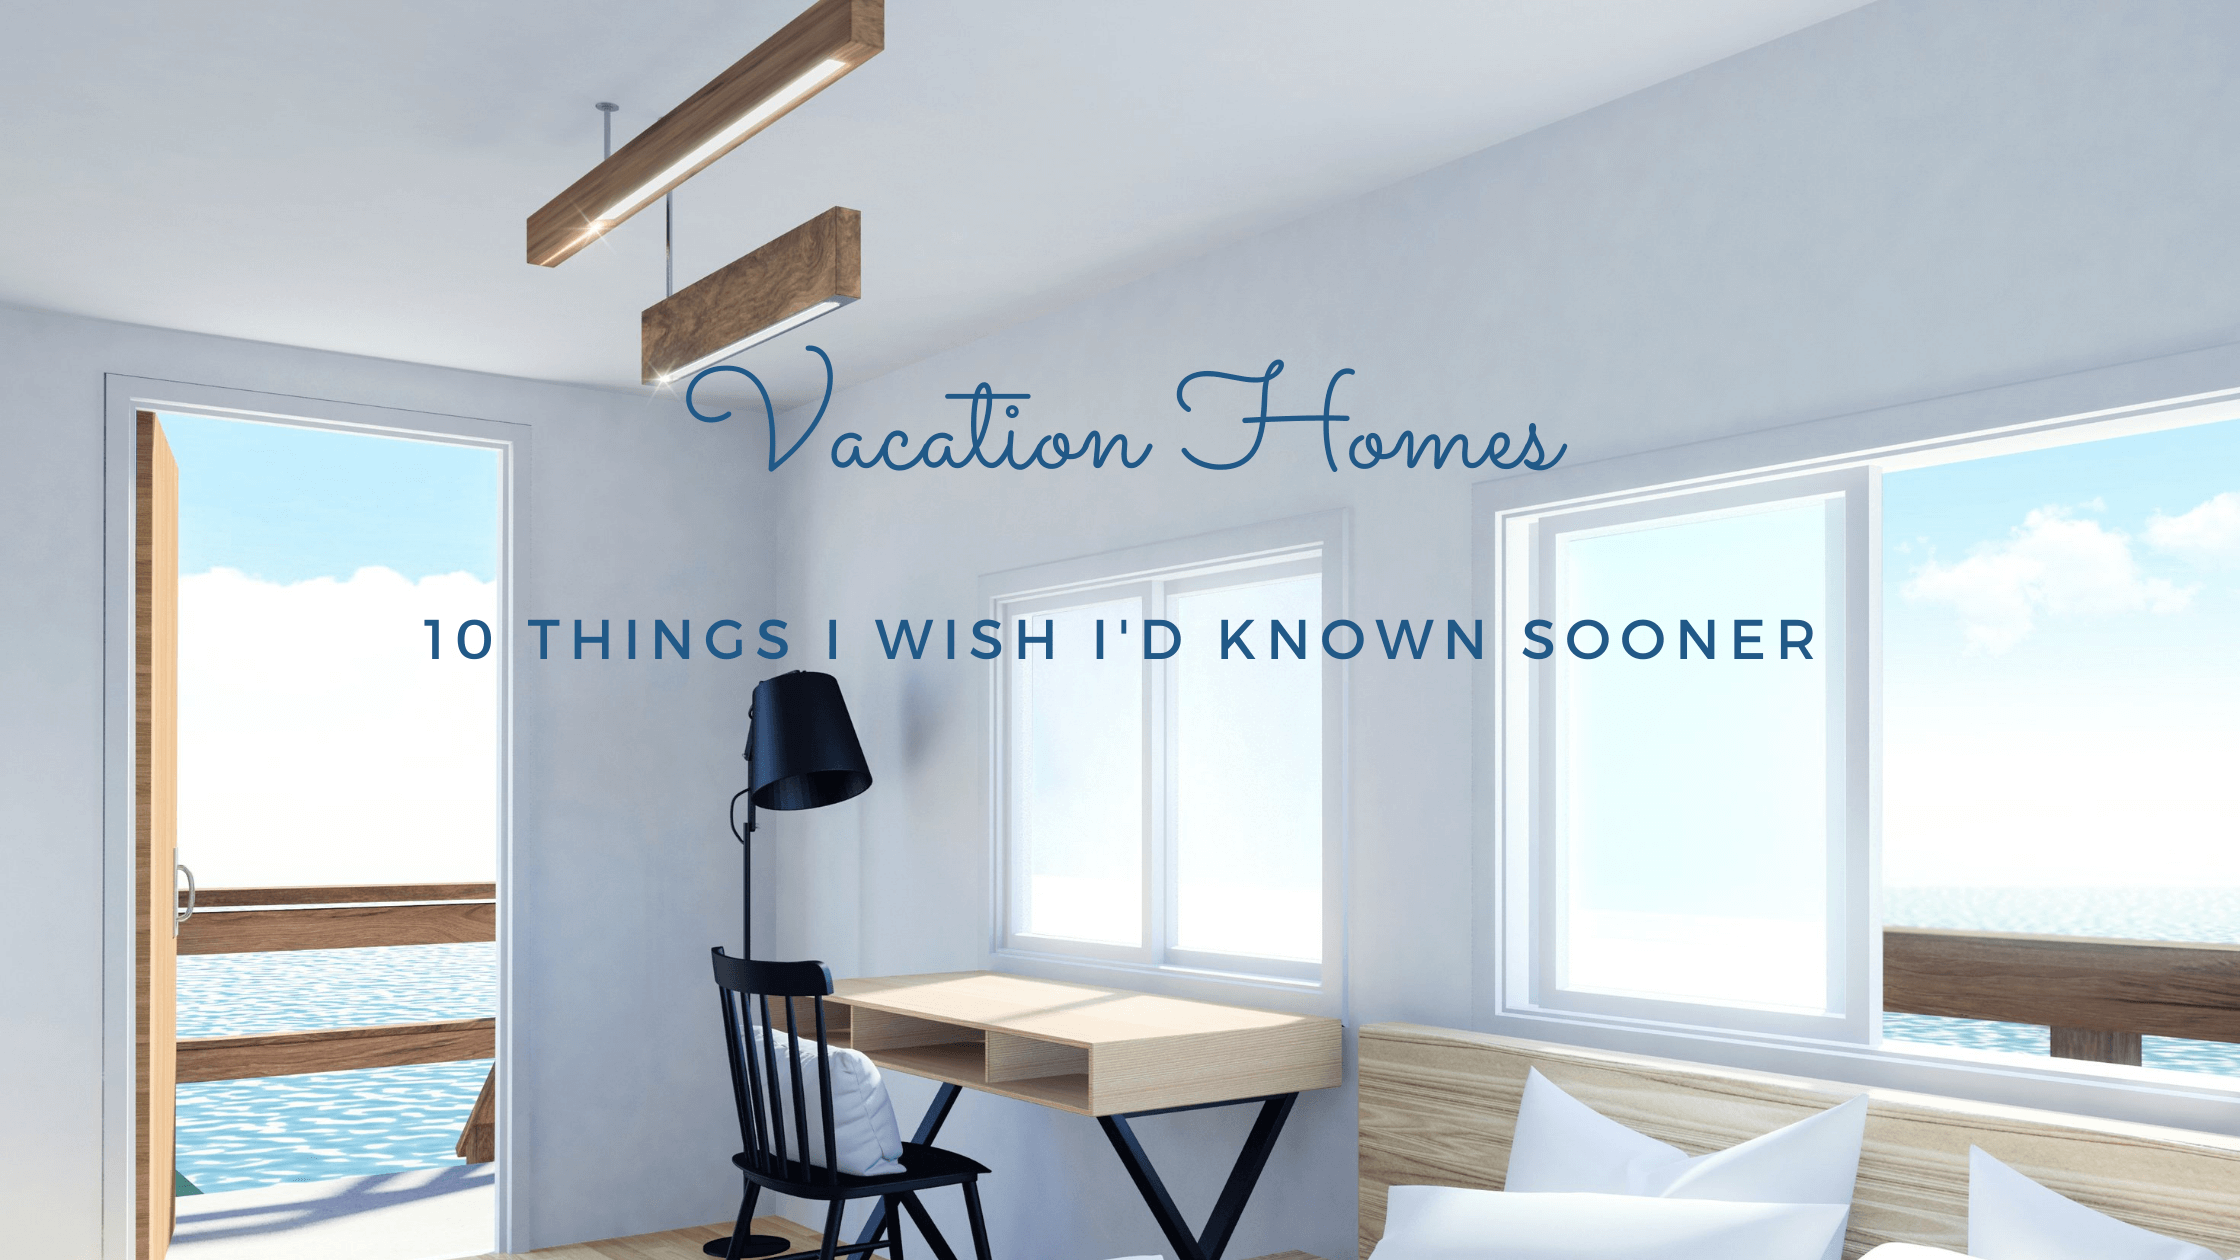 Vacation Homes 10 Things I Wish I'd Known Sooner